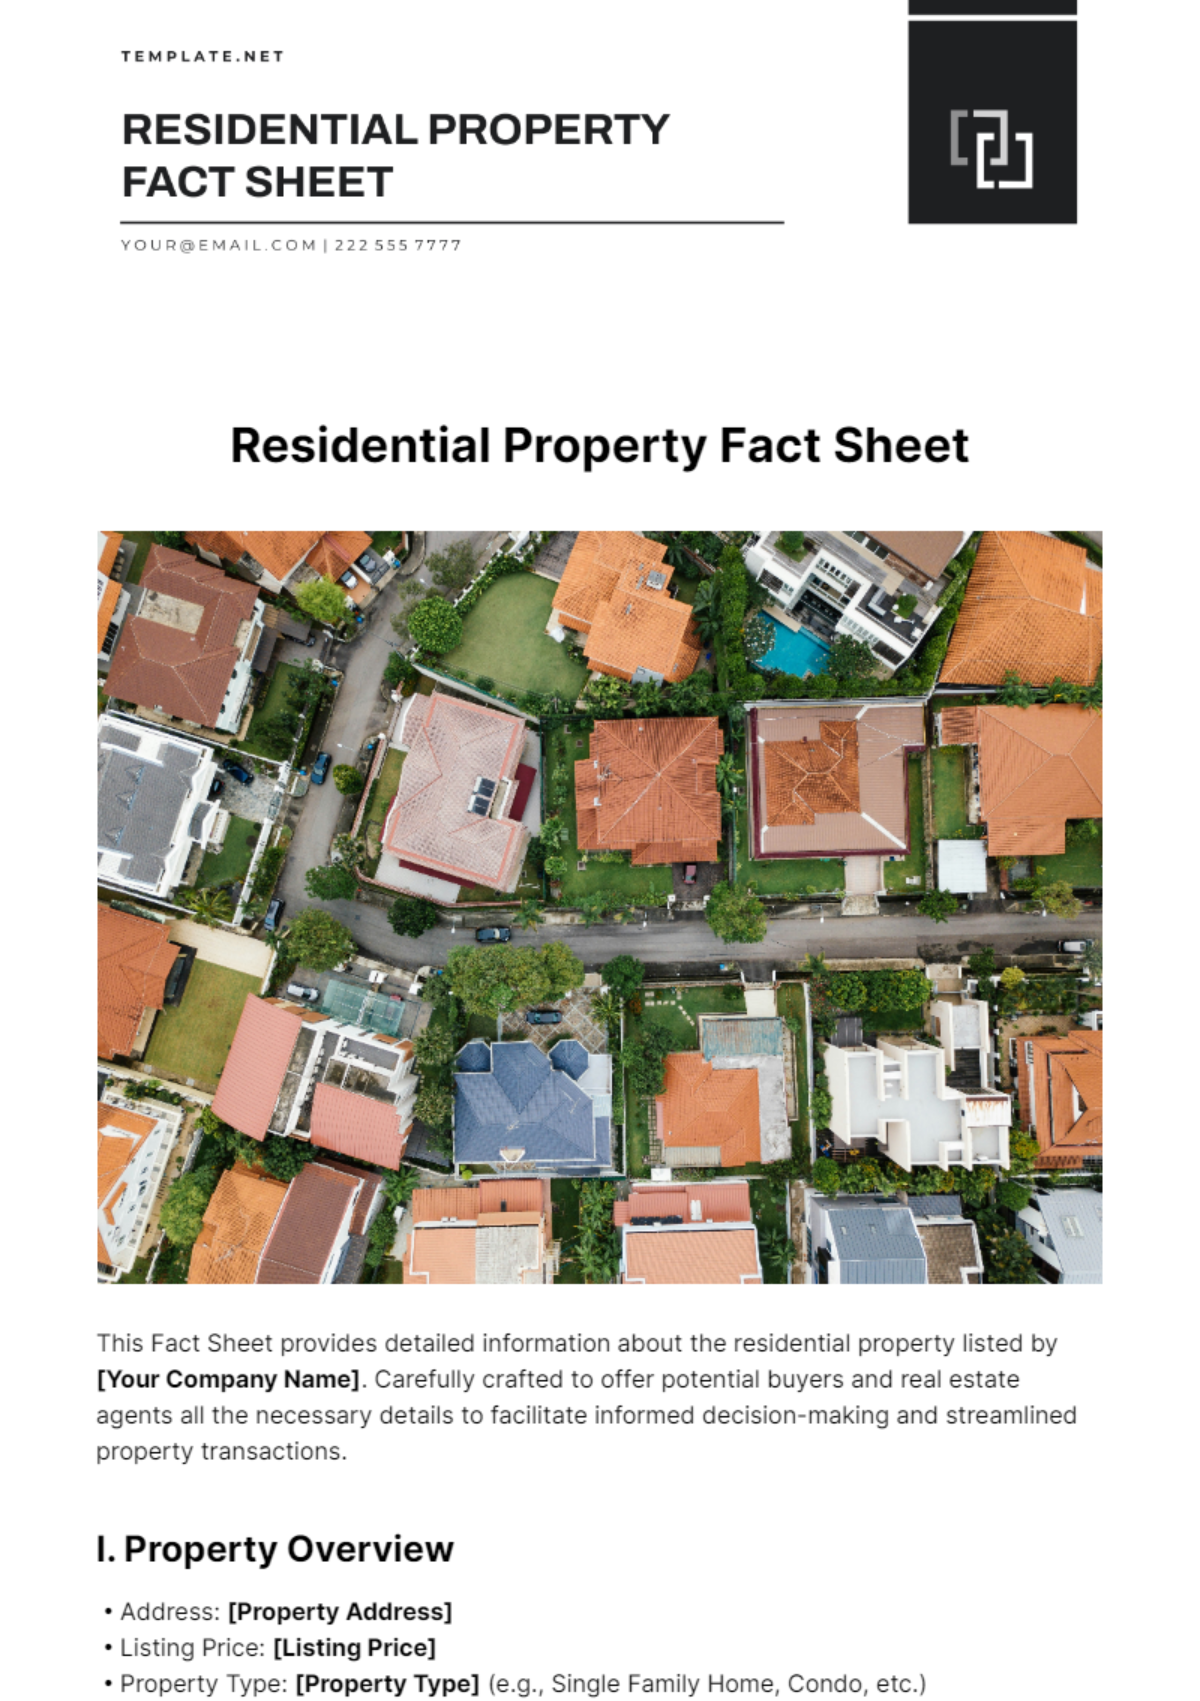 Residential Property Fact Sheet Template